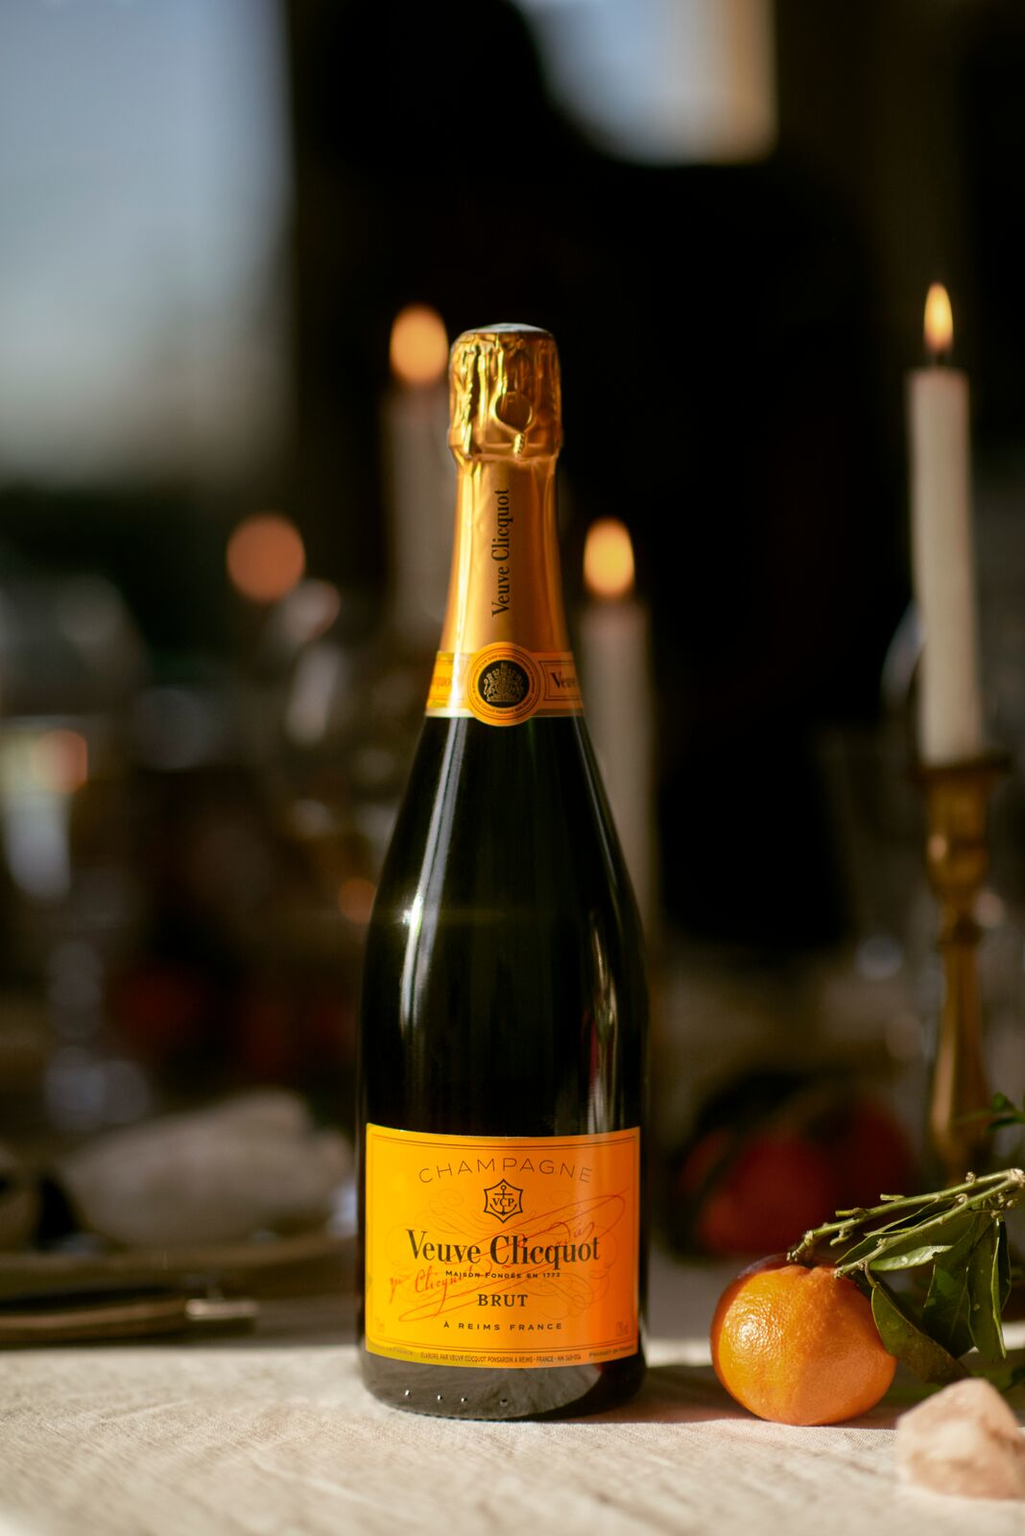 Veuve Clicquot Brut 75CL in gift packaging